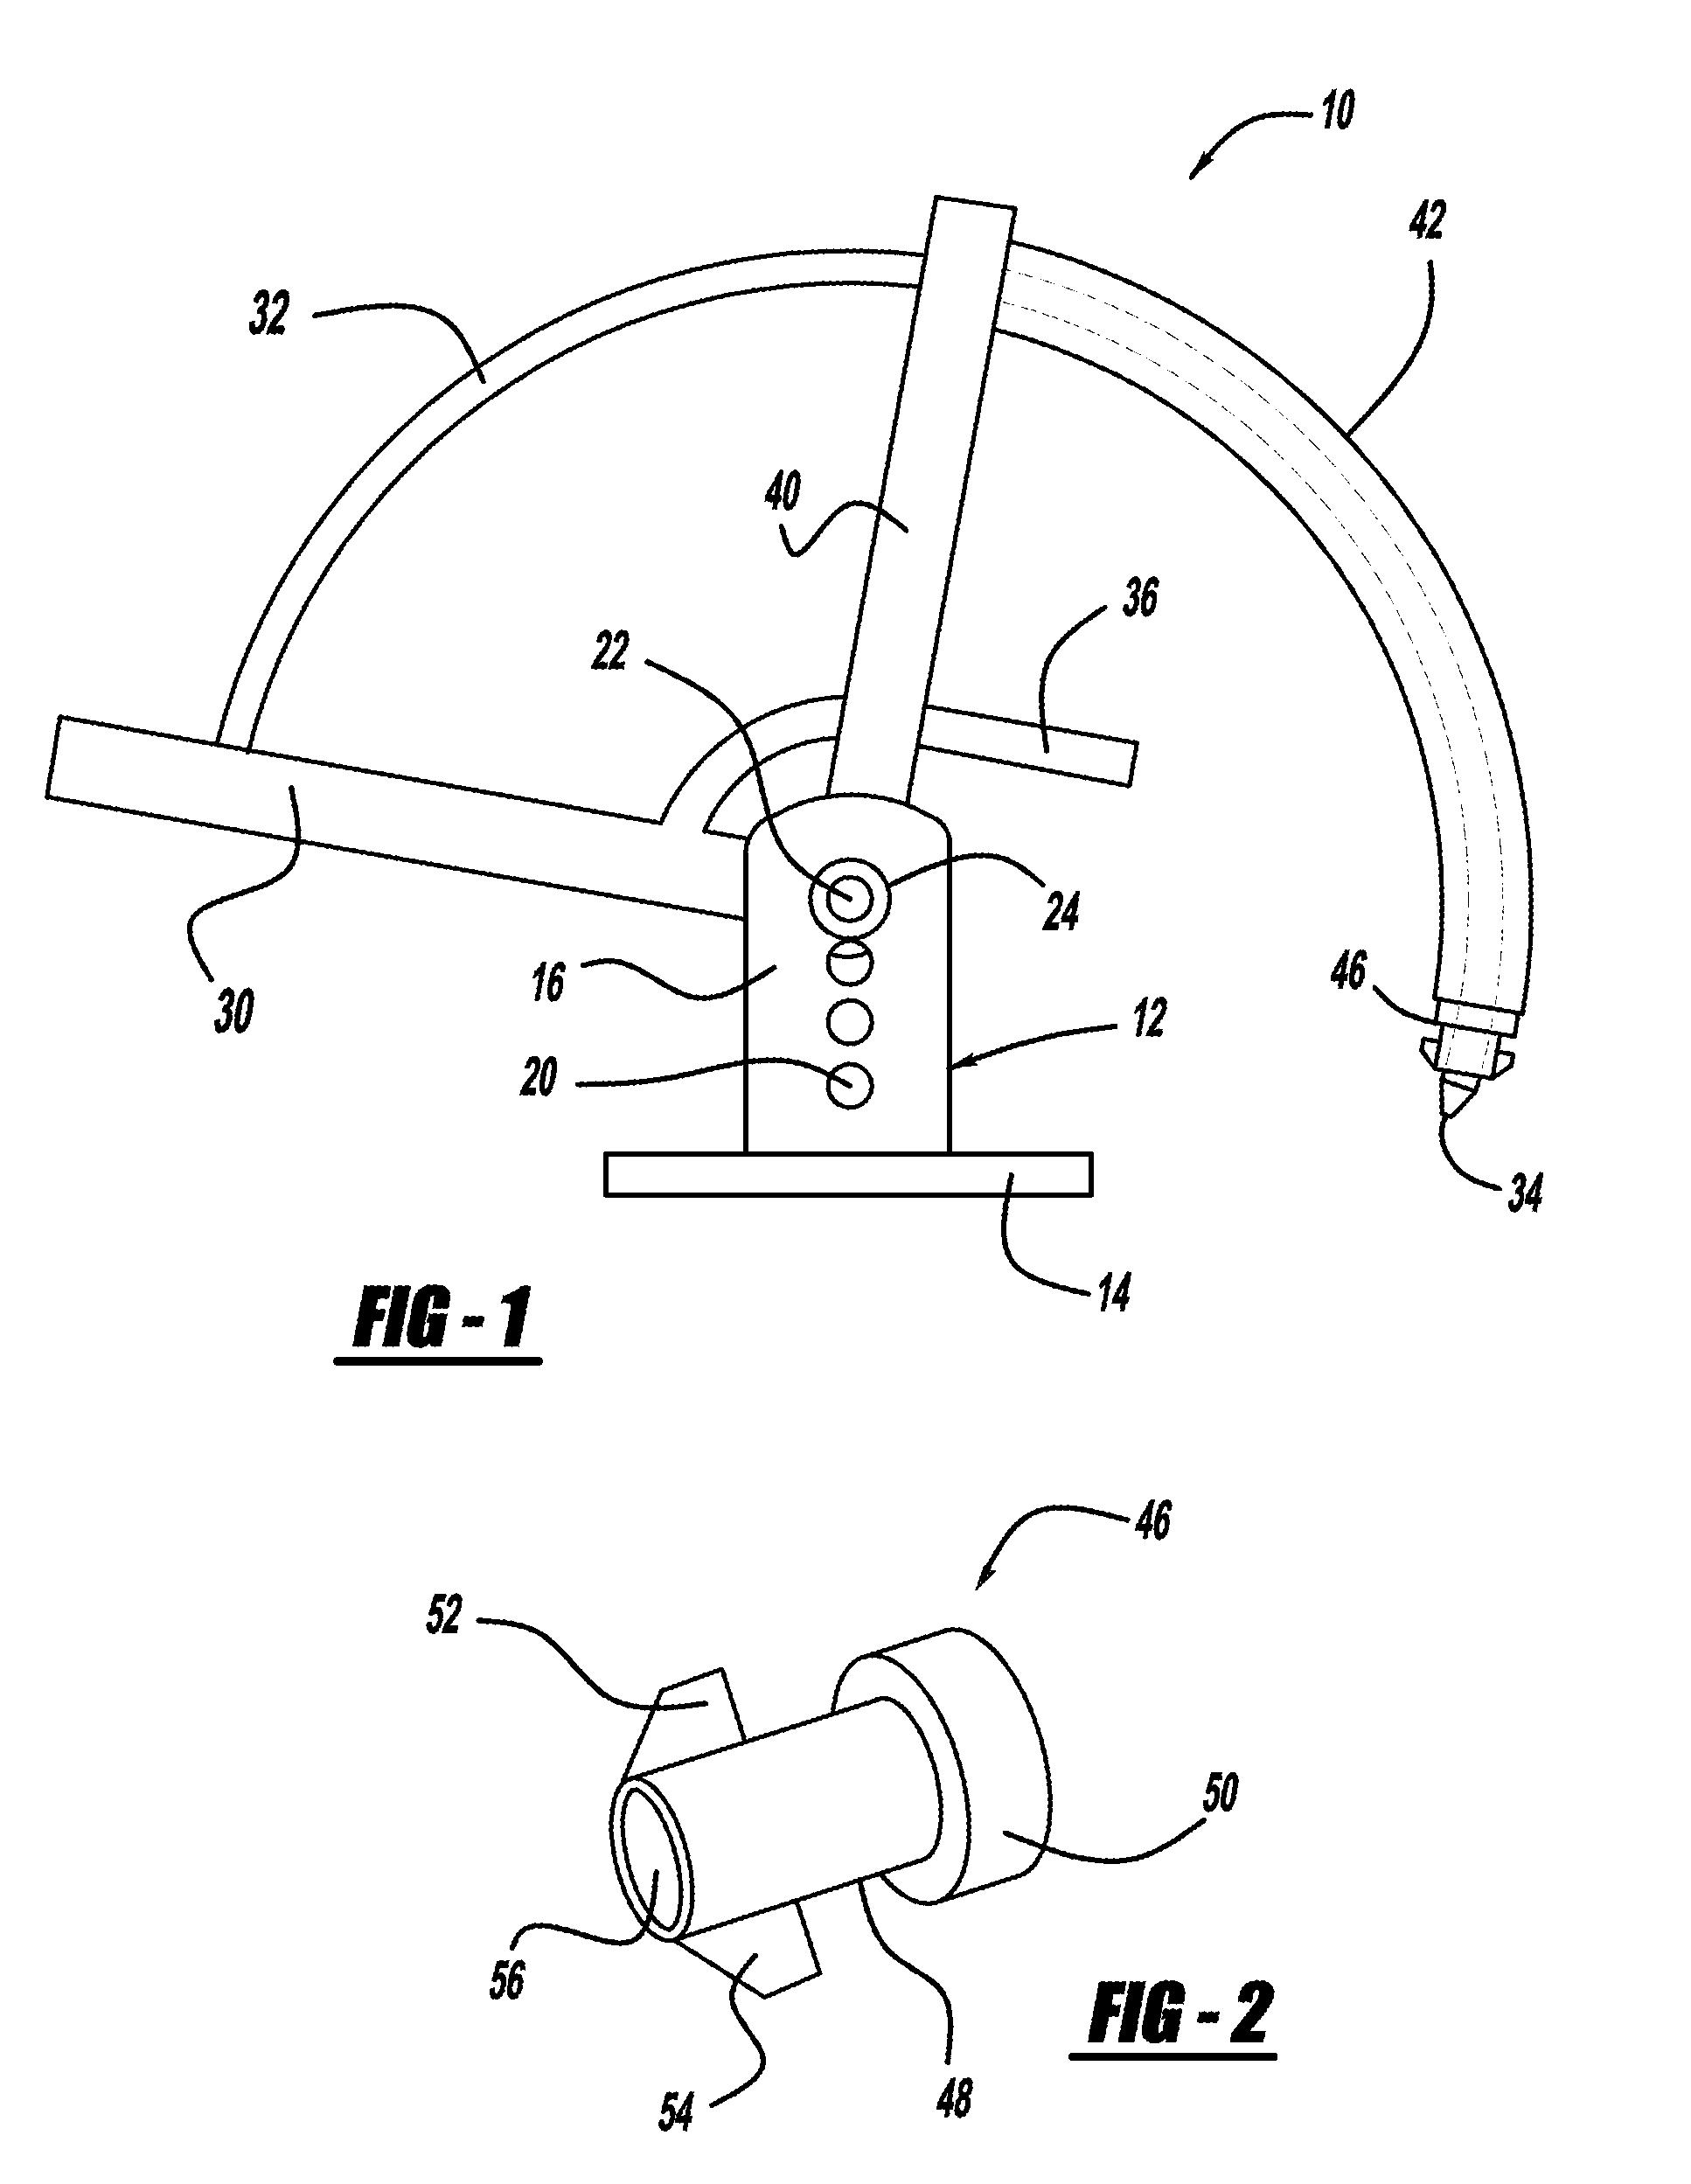 Interspinous process spacer device including a rotatable retaining member